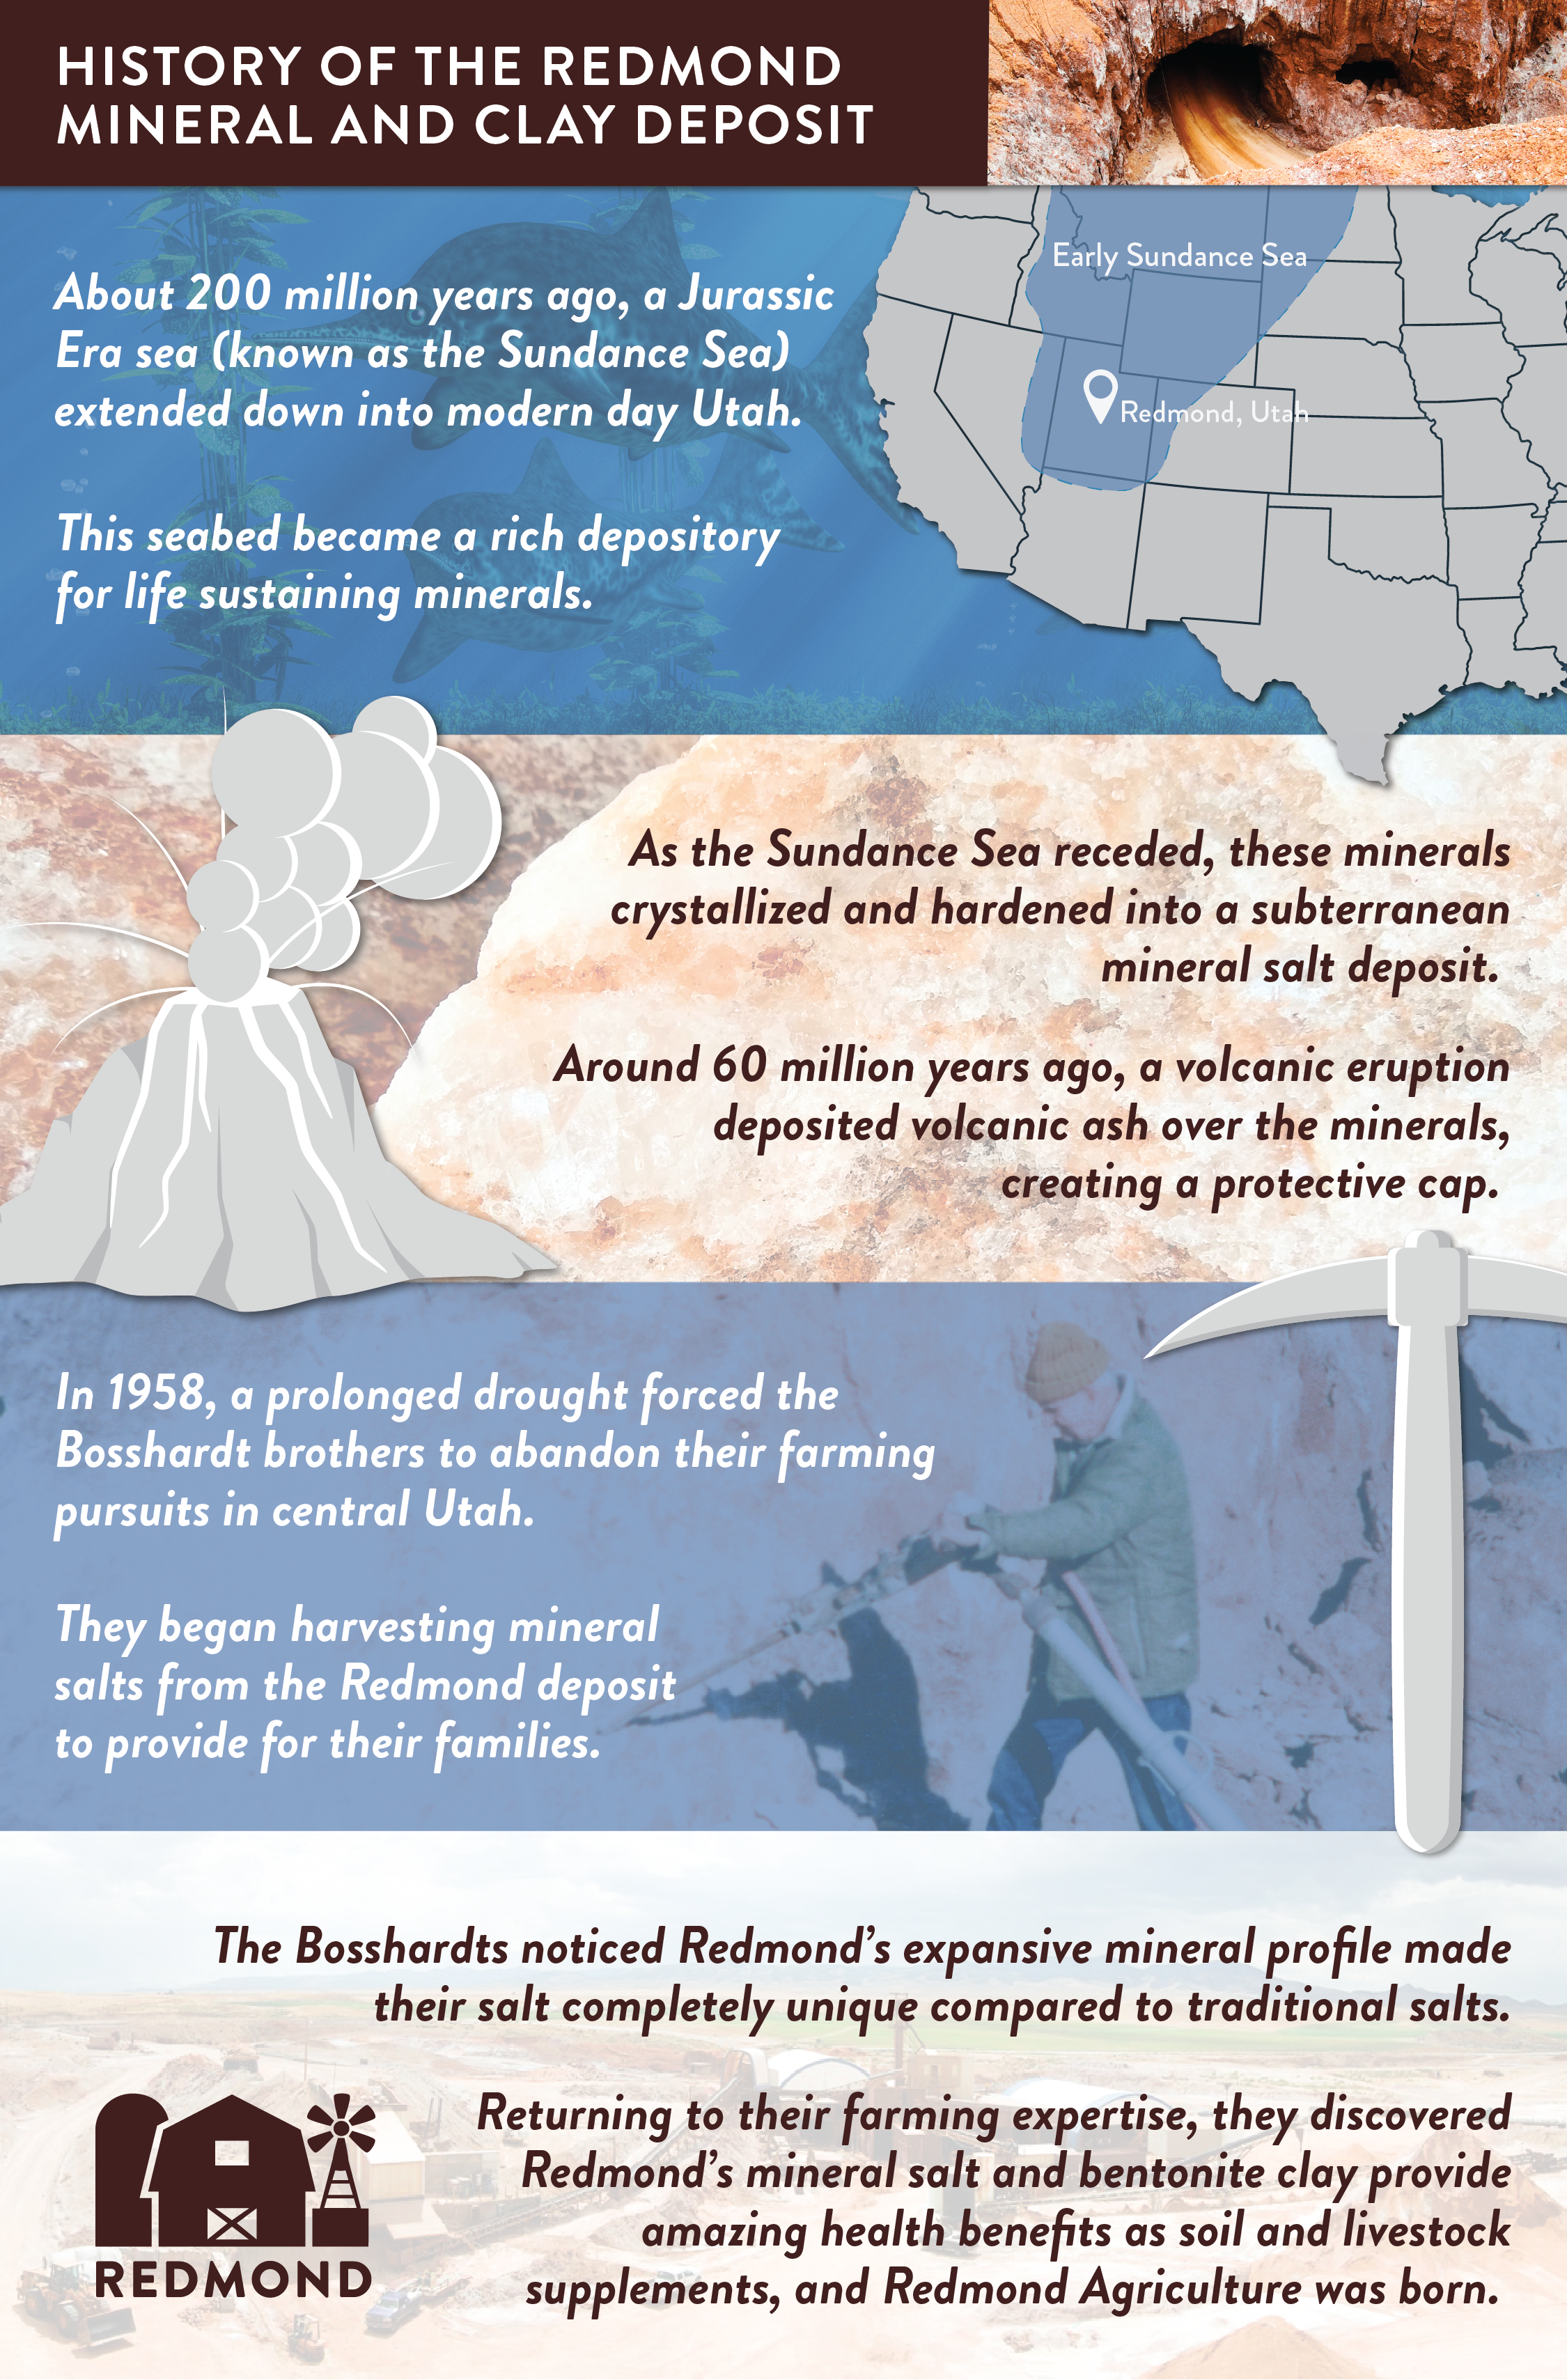 History of the Redmond mineral and clay deposit